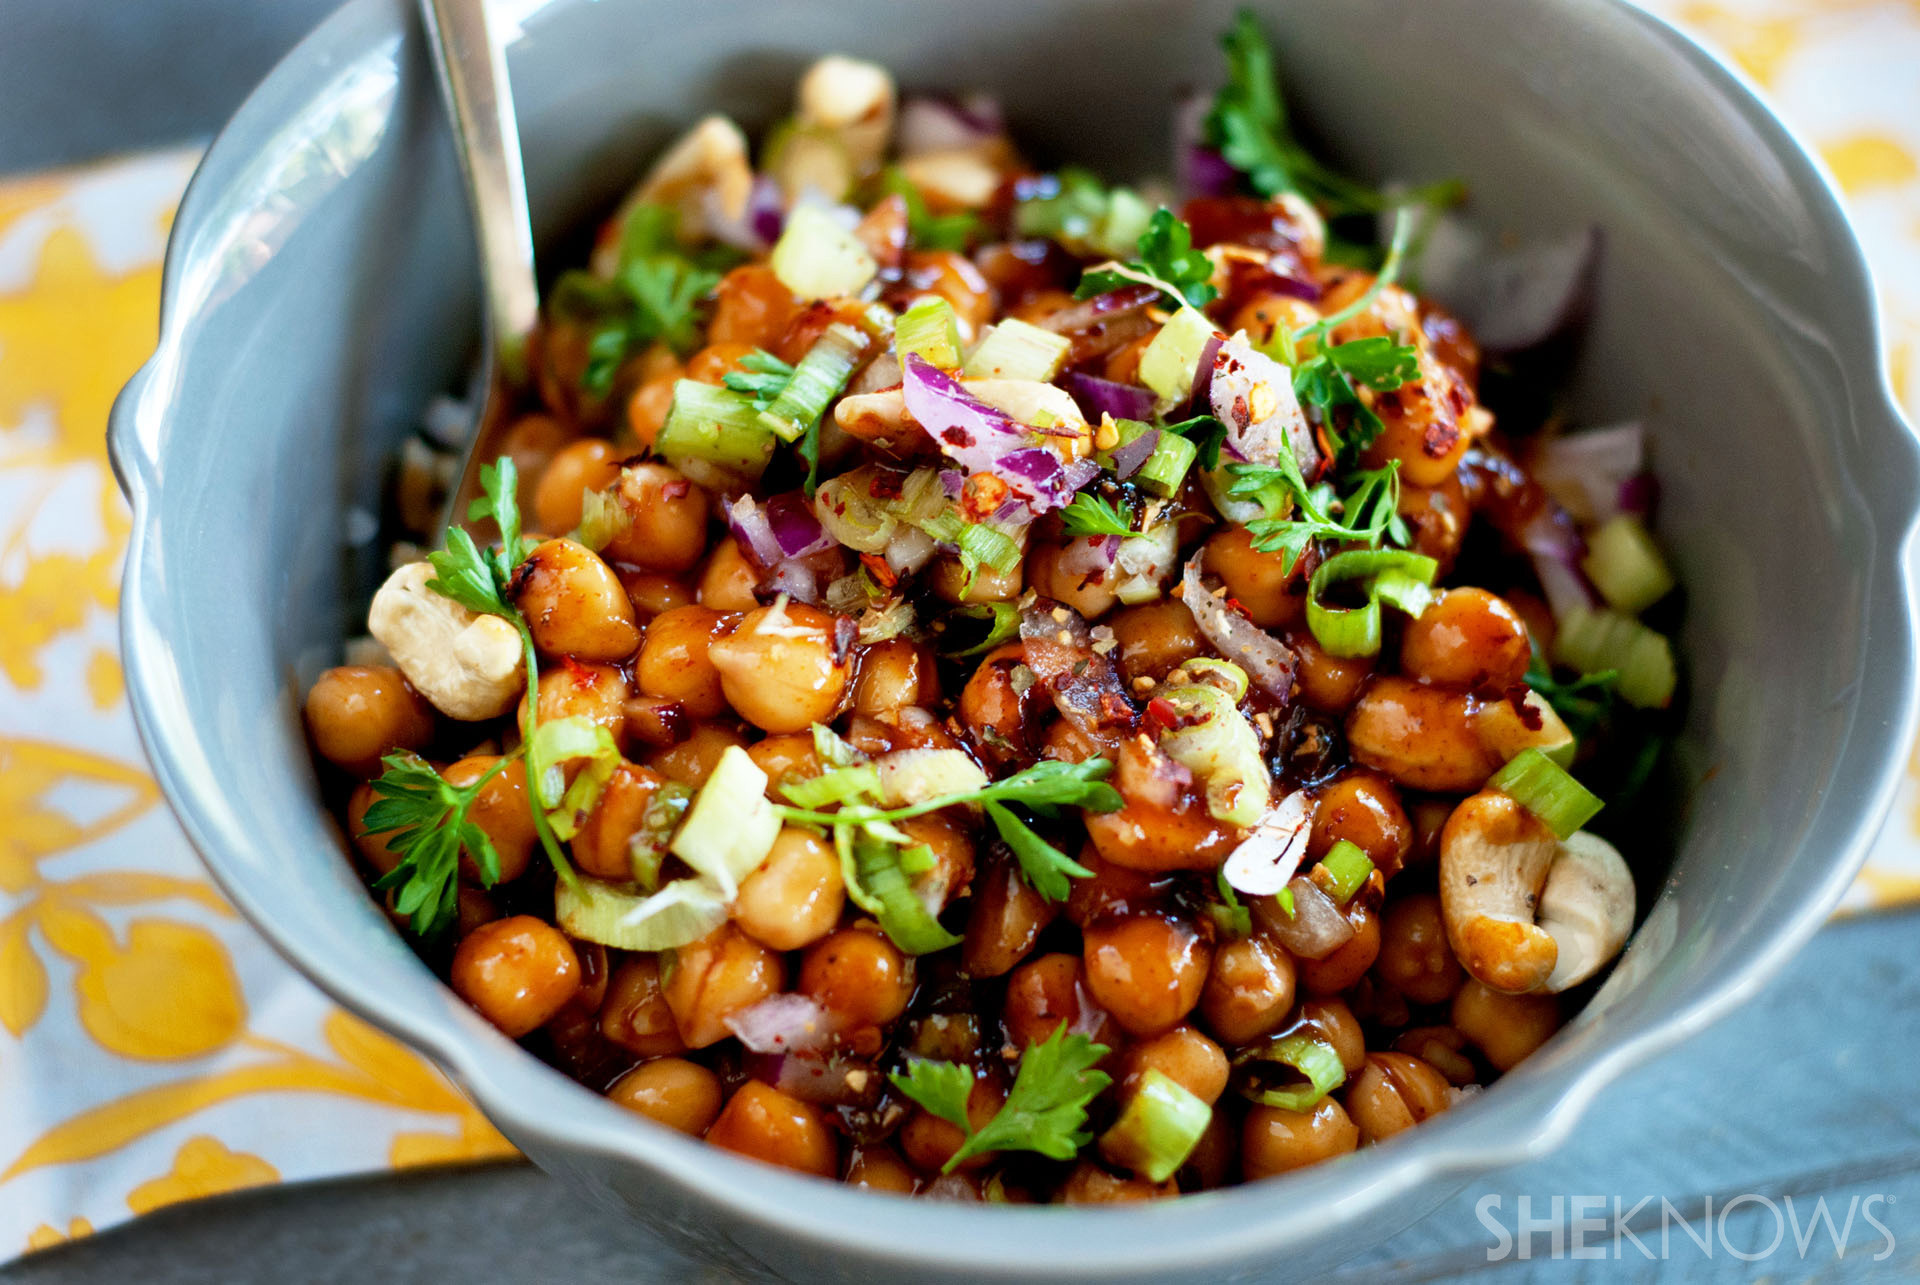 Chick Pea Vegetarian Recipes
 Kung pao chickpeas Turn a favorite Chinese takeout dish vegan